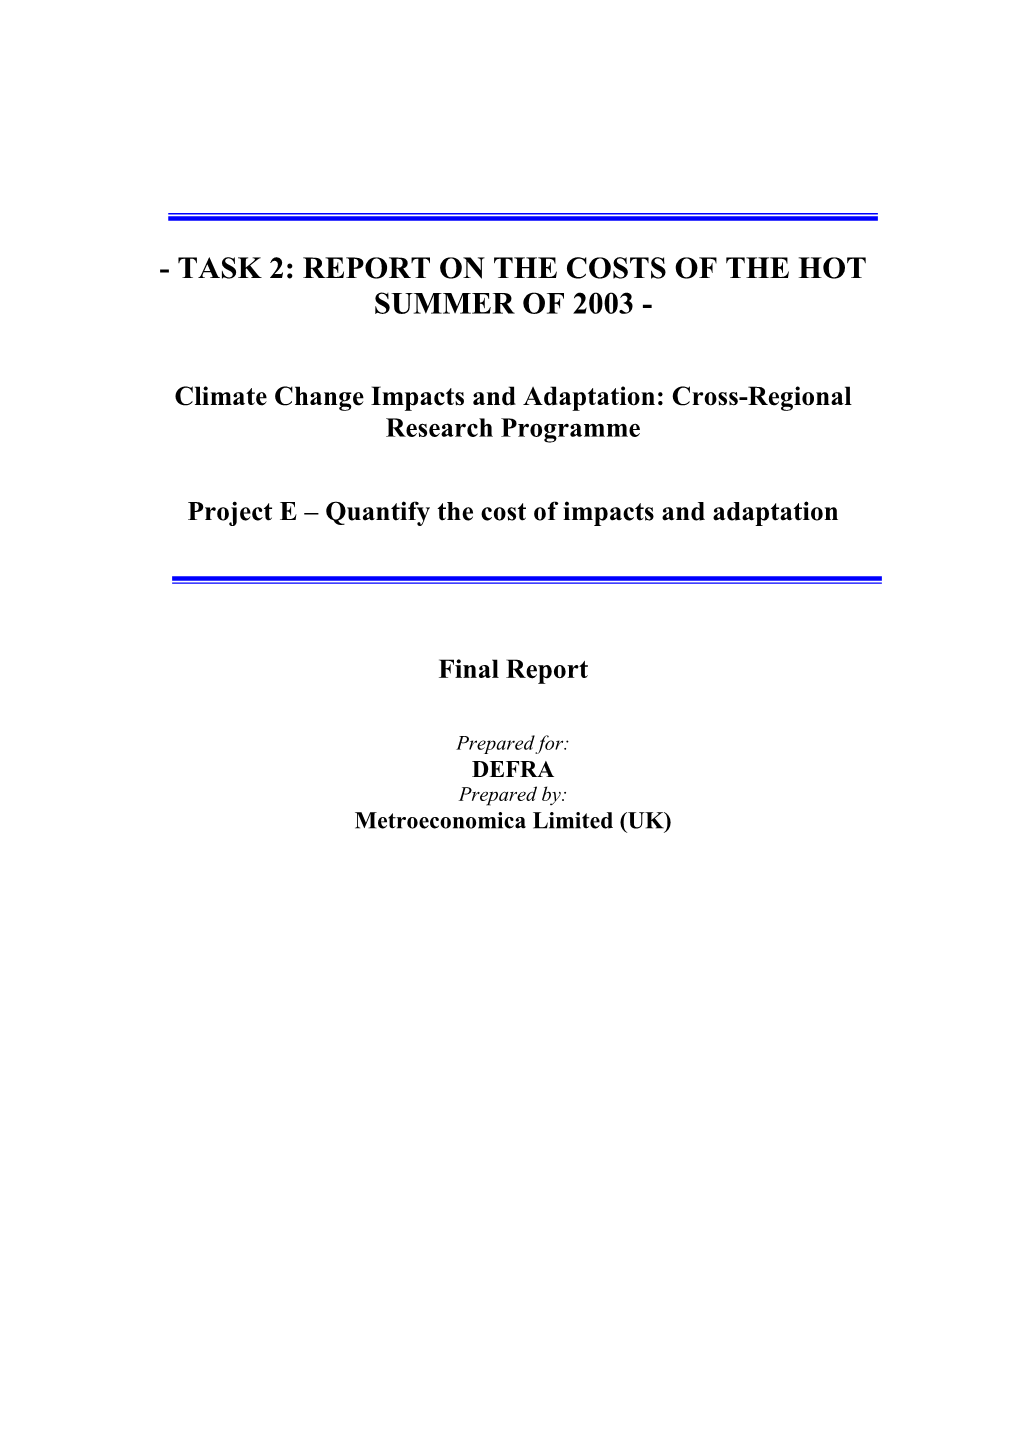 Task 2: Report on the Costs of the Hot Summer of 2003